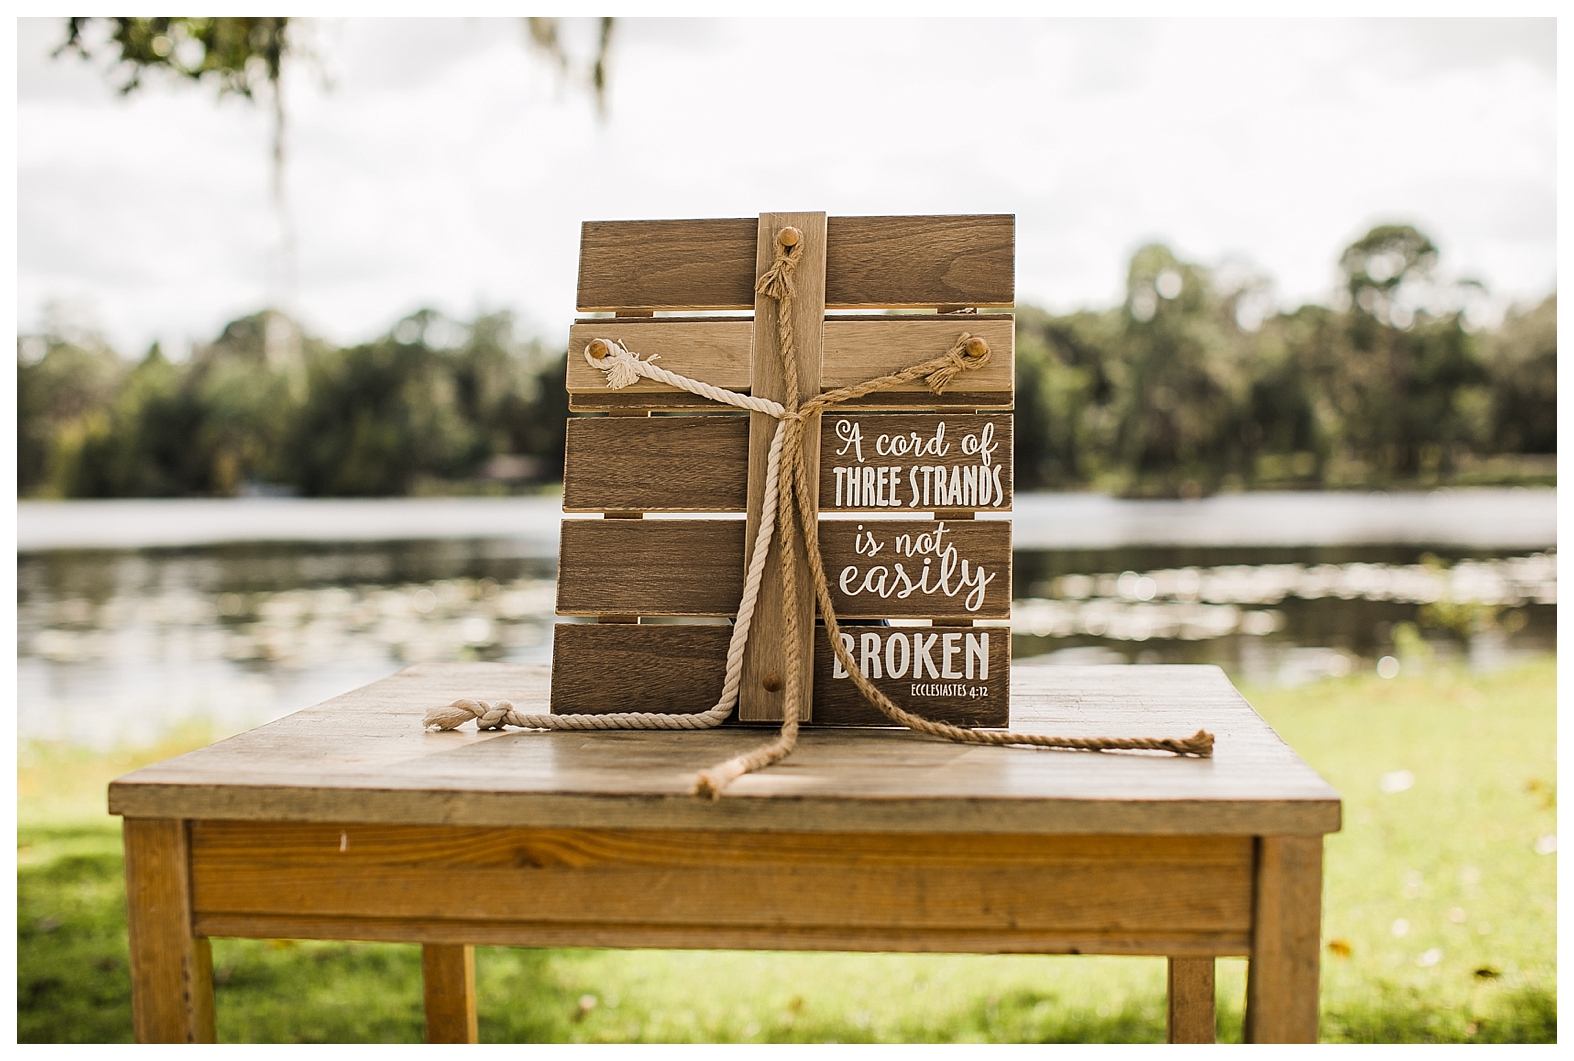 Ceremony Details - Sara and Chad - Tampa Photographer